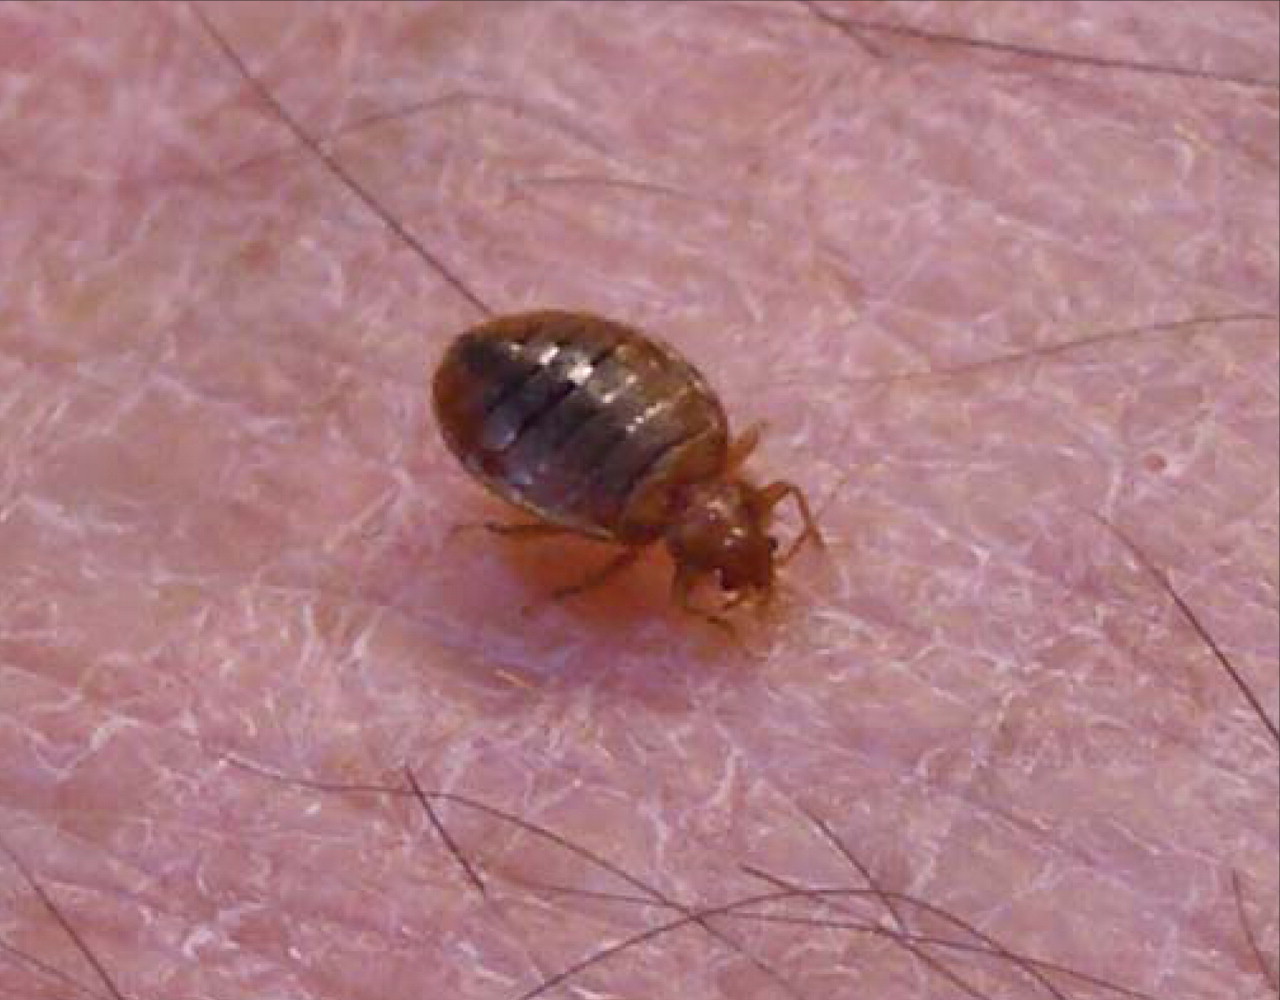 Severe anemia from bedbugs | CMAJ